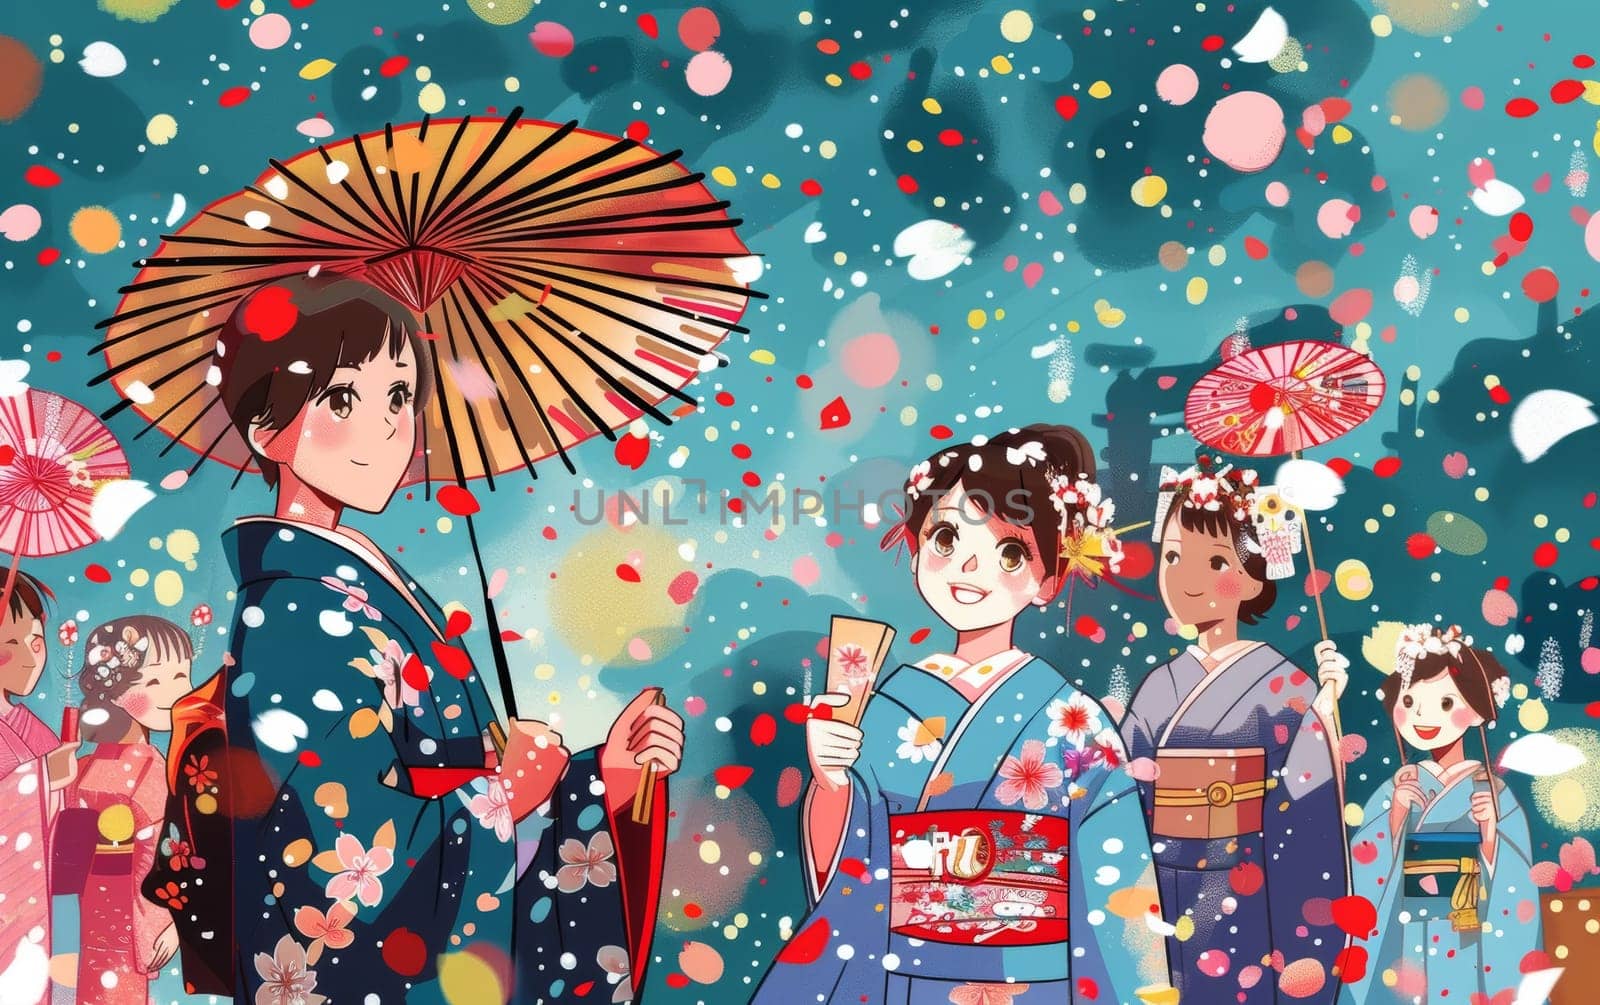 Crowds of joyful people in colorful traditional Japanese attire celebrate the Hanami festival, surrounded by a whimsical display of falling petals and fireworks. by sfinks